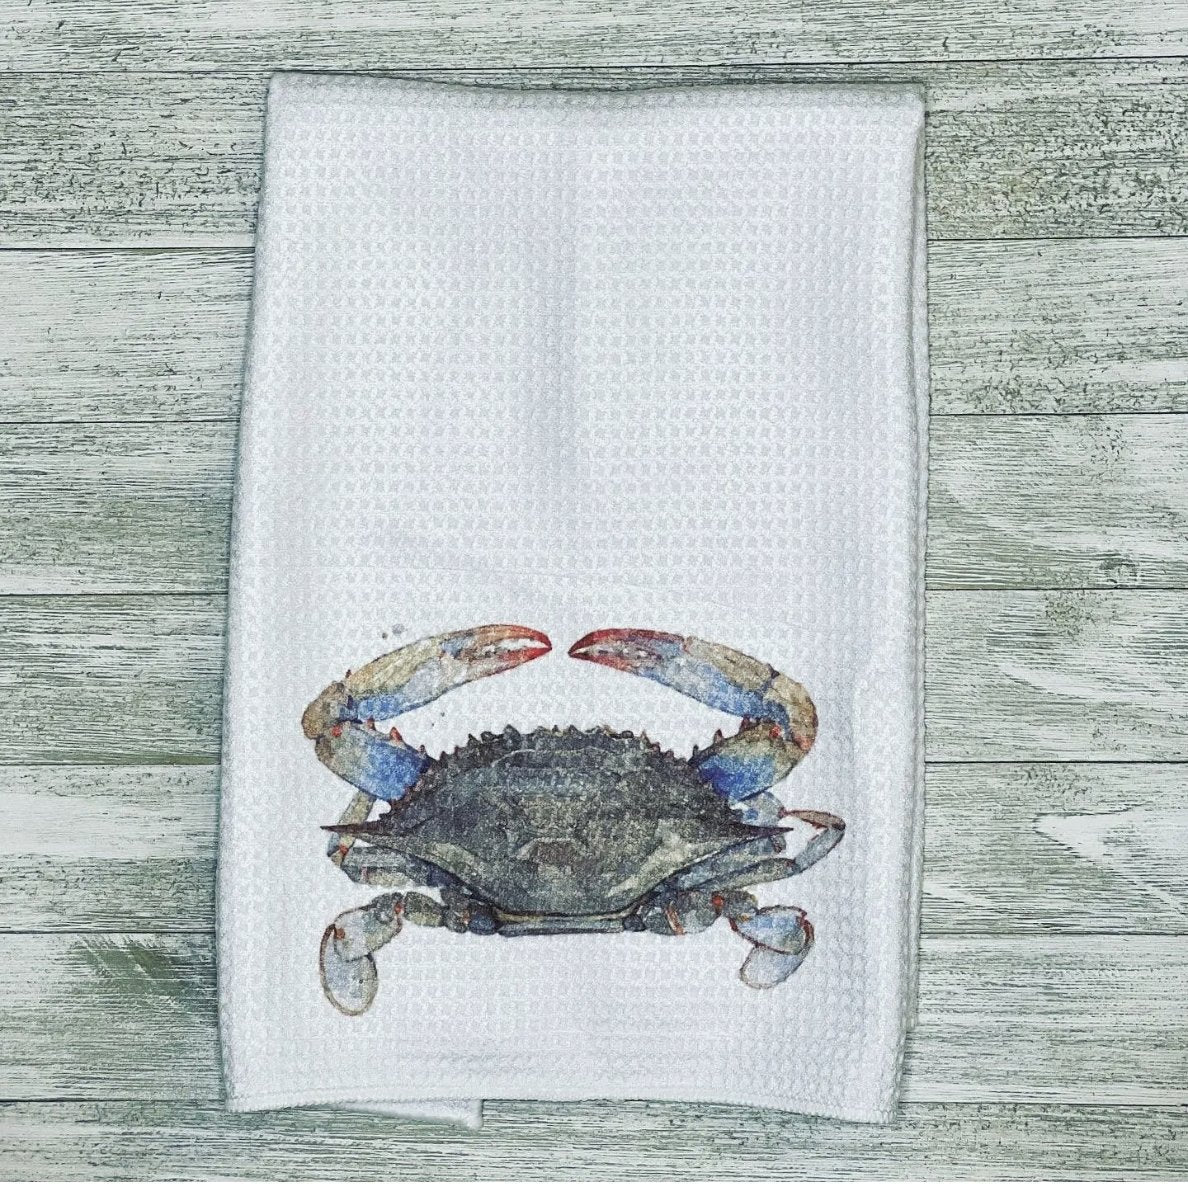 Holy City Creations Lowcountry Blue Crab Kitchen Towel